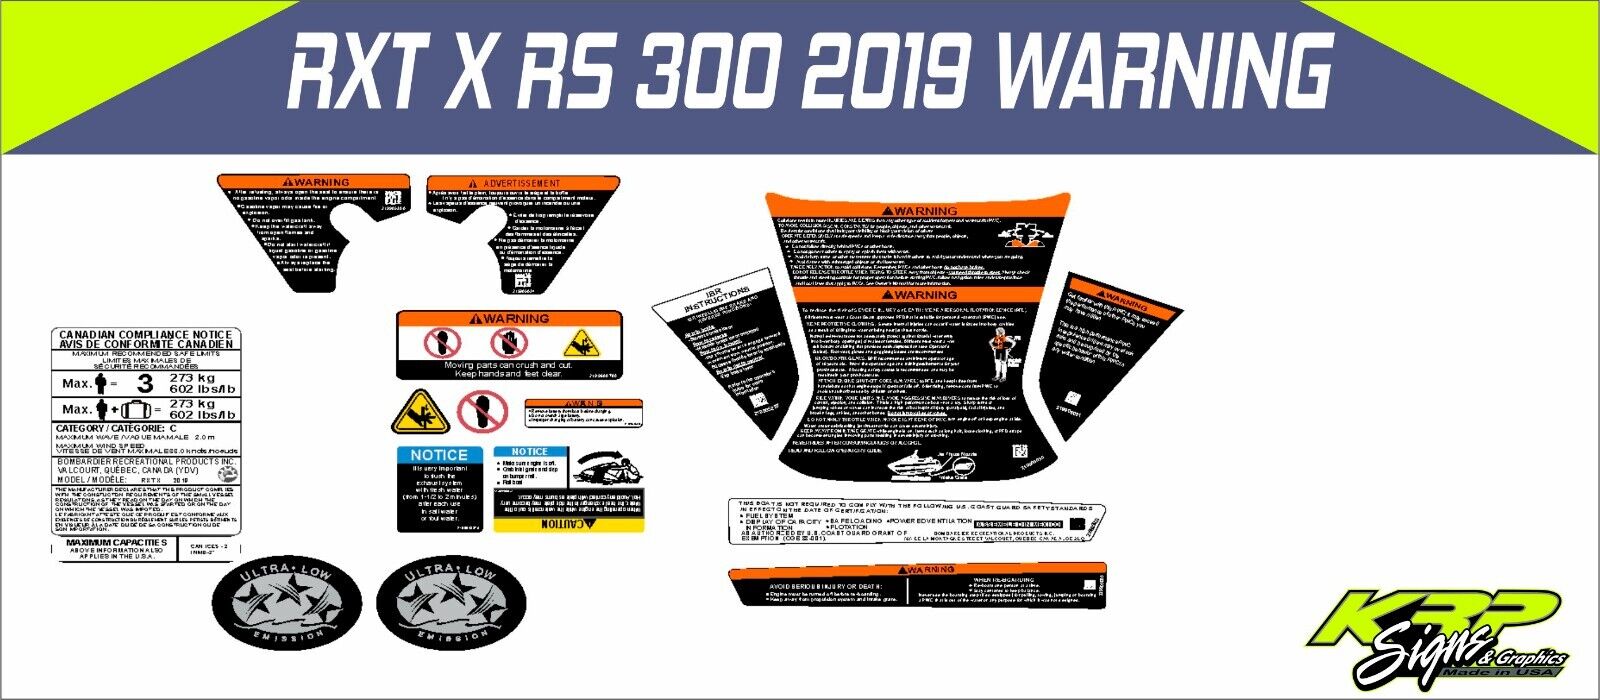 SEADOO RXT X RS 300 2019 Graphics / Decal / Sticker Kit WARNING DECALS